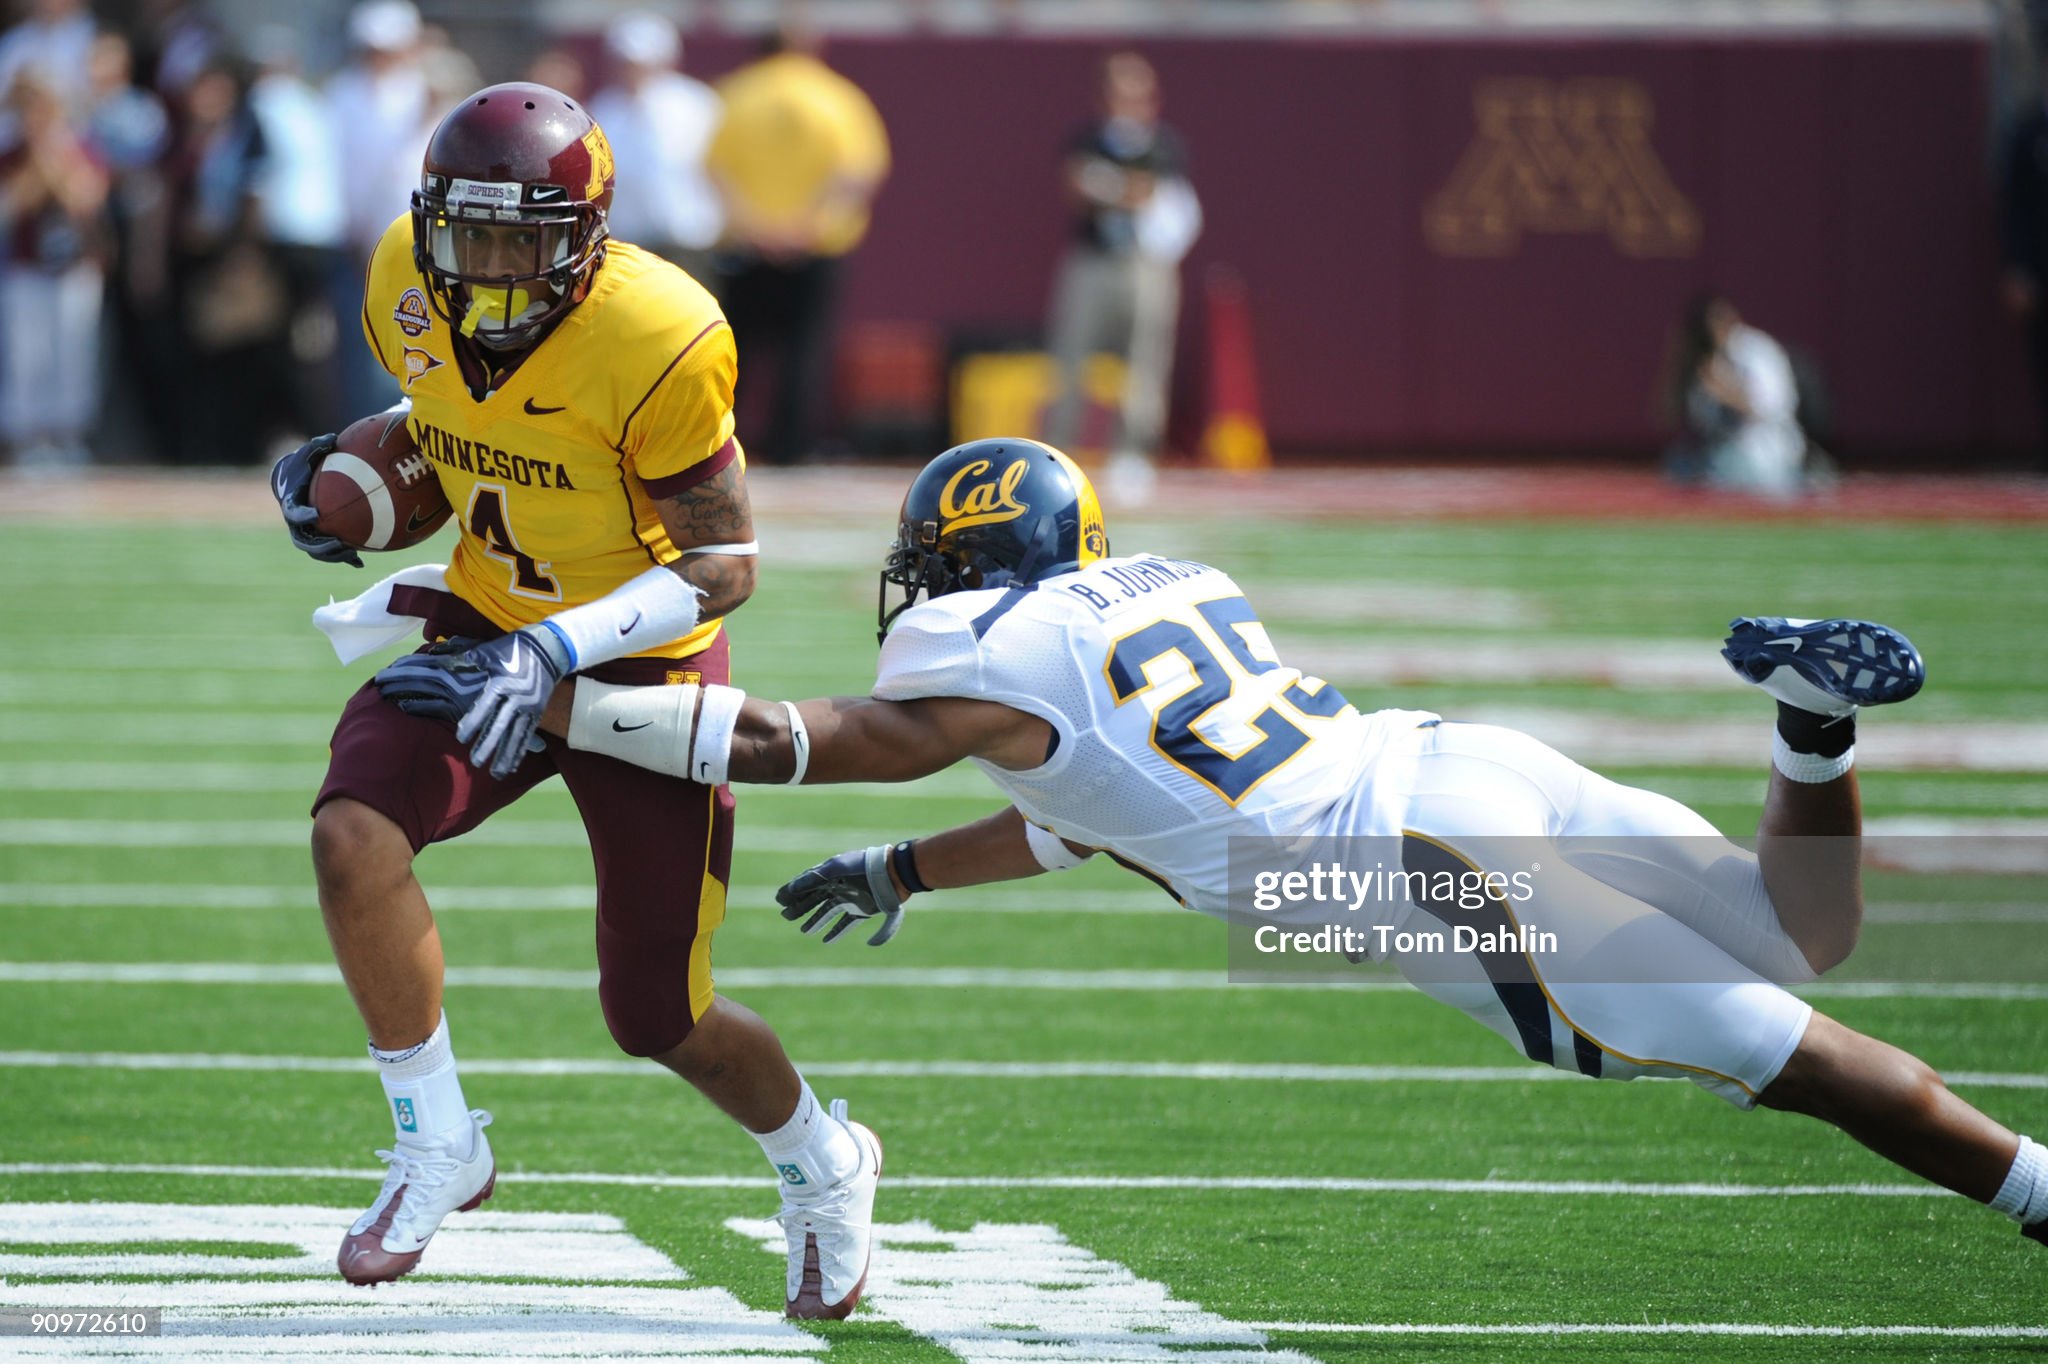 keanon-cooper-of-the-minnesota-golden-gophers-carries-the-ball-in-a-picture-id90972610